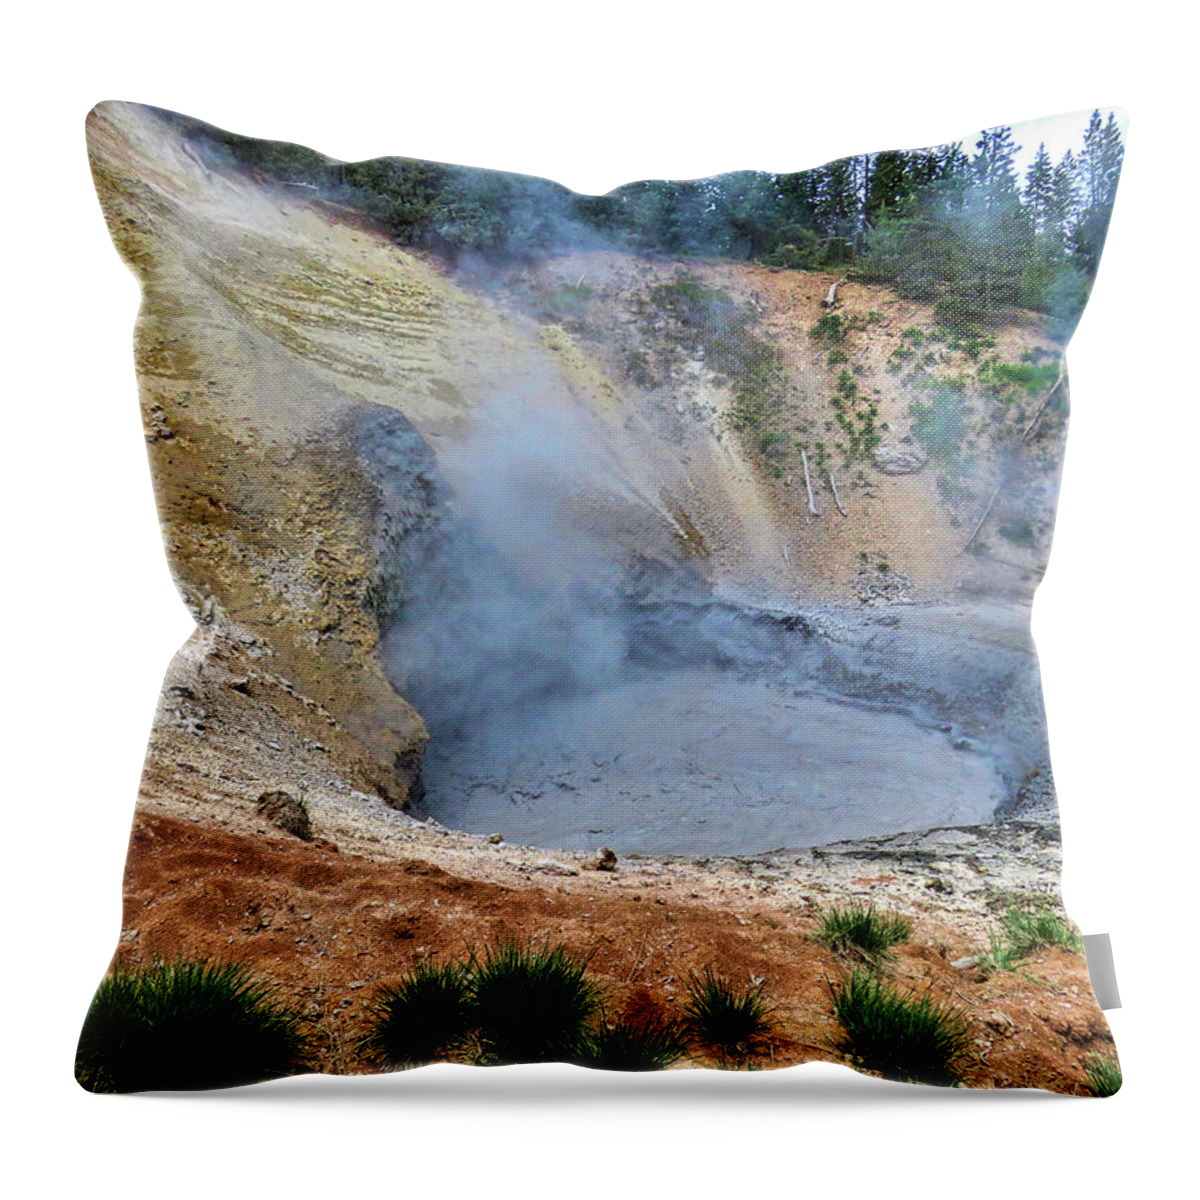 Mud Volcano Throw Pillow featuring the photograph Mud Volcano Yellowstone by Helaine Cummins